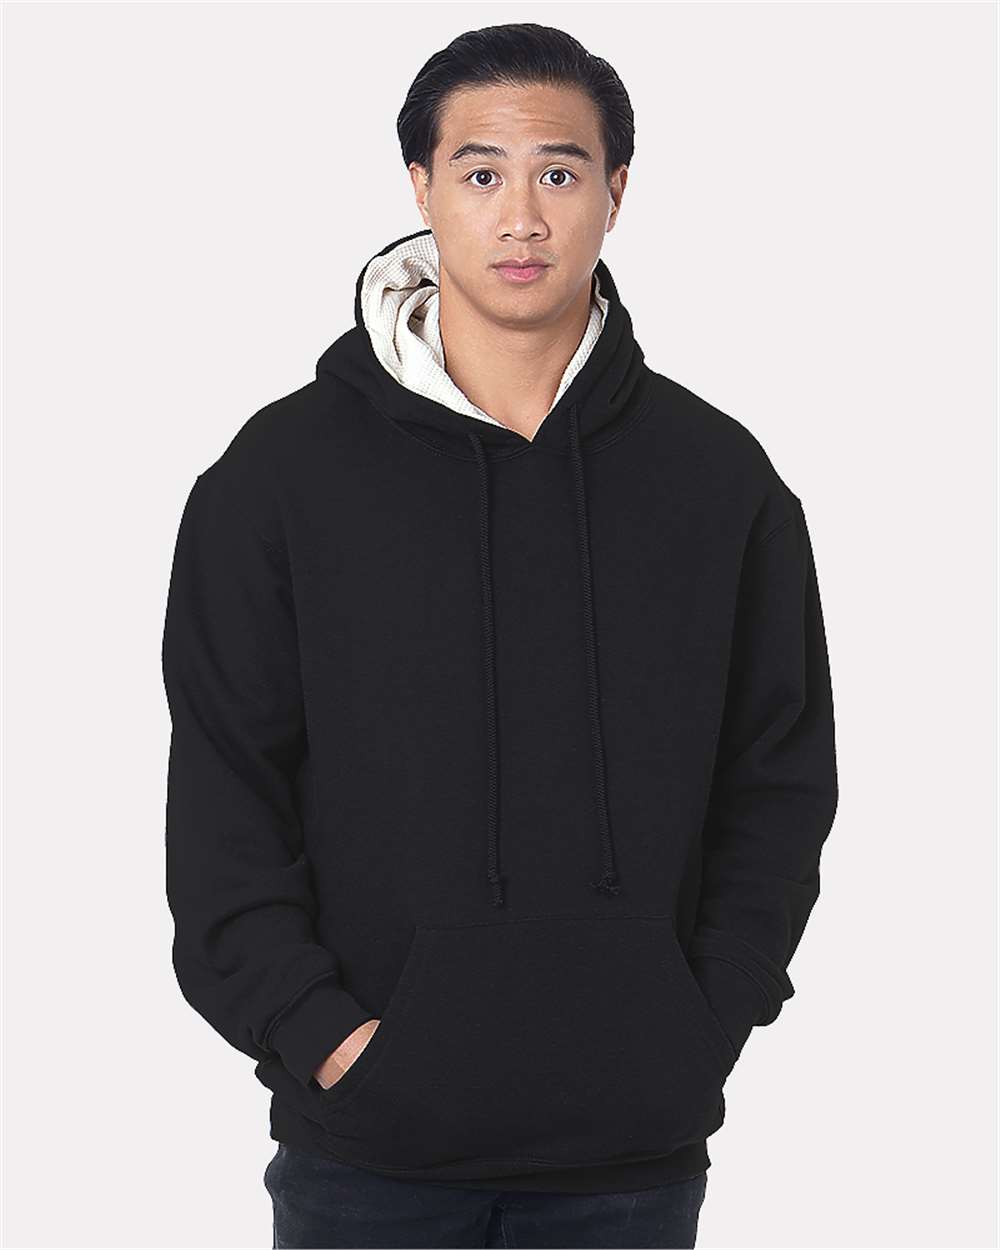 Bayside 930 - USA-Made Super Heavy Thermal Lined Hooded Sweatshirt